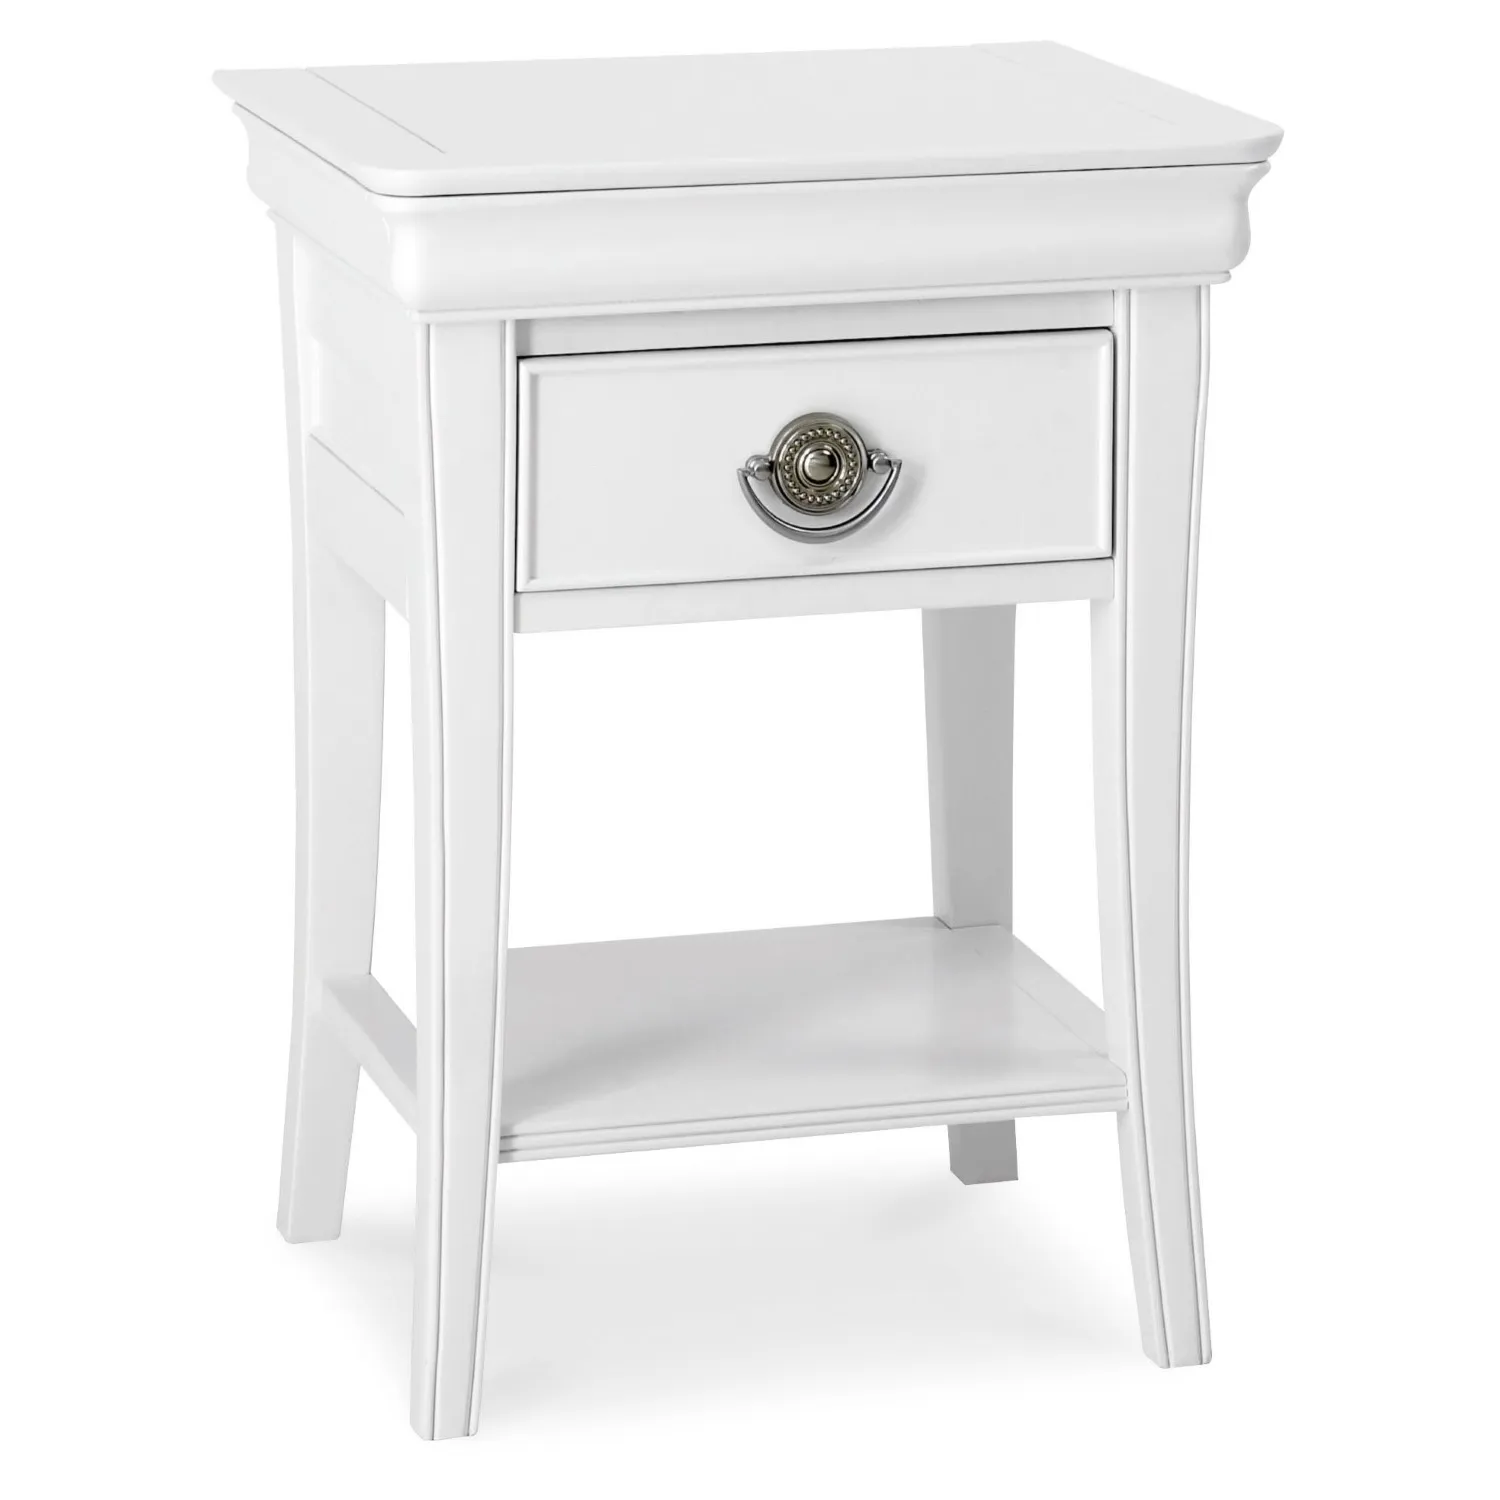 White Painted 2 Drawer Bedside Table with Shelf